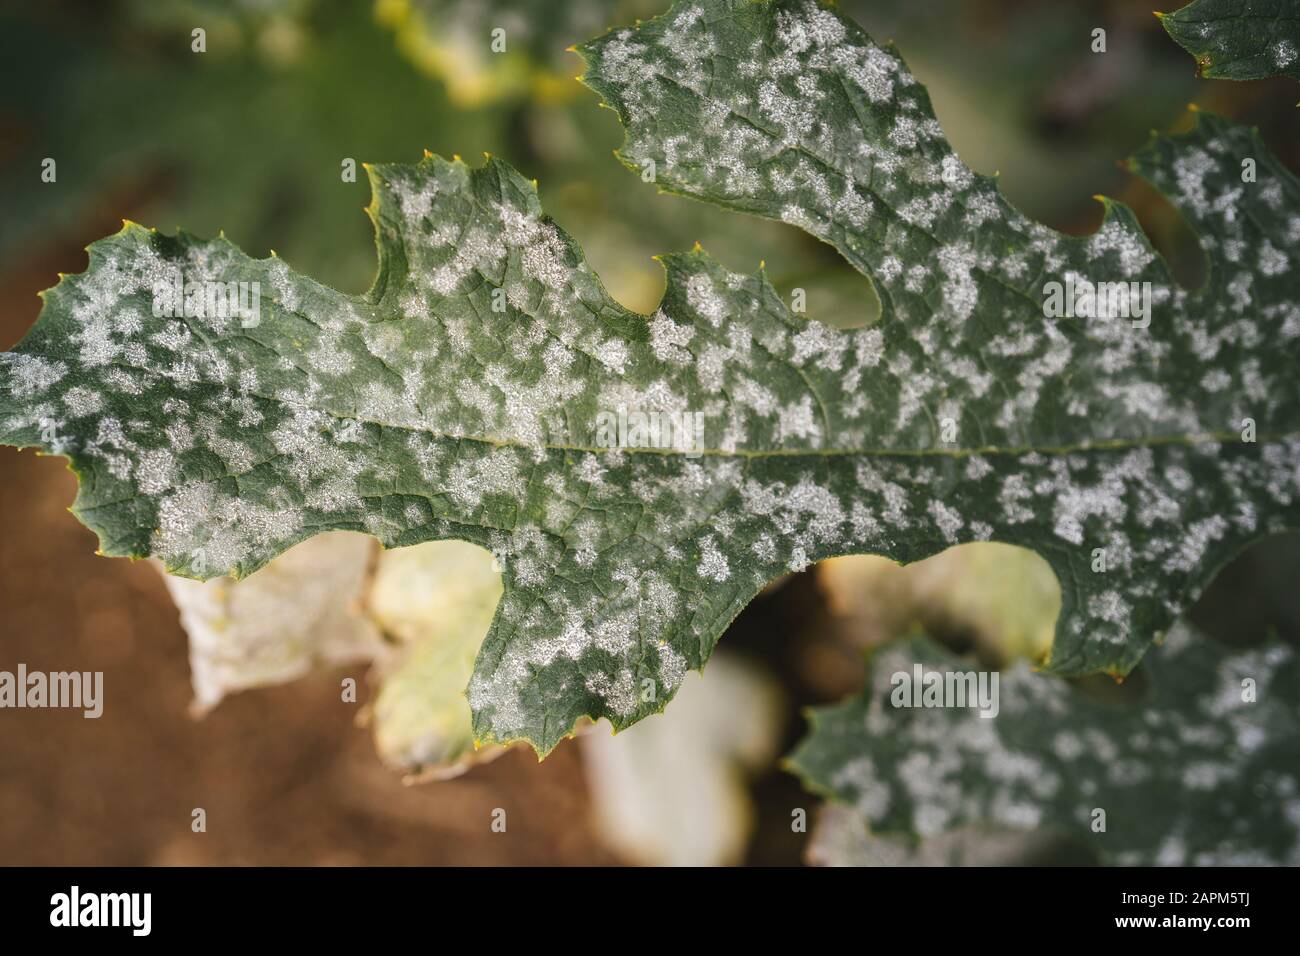 Zucchini crop infested by Leveillula Taurica, close-up Stock Photo